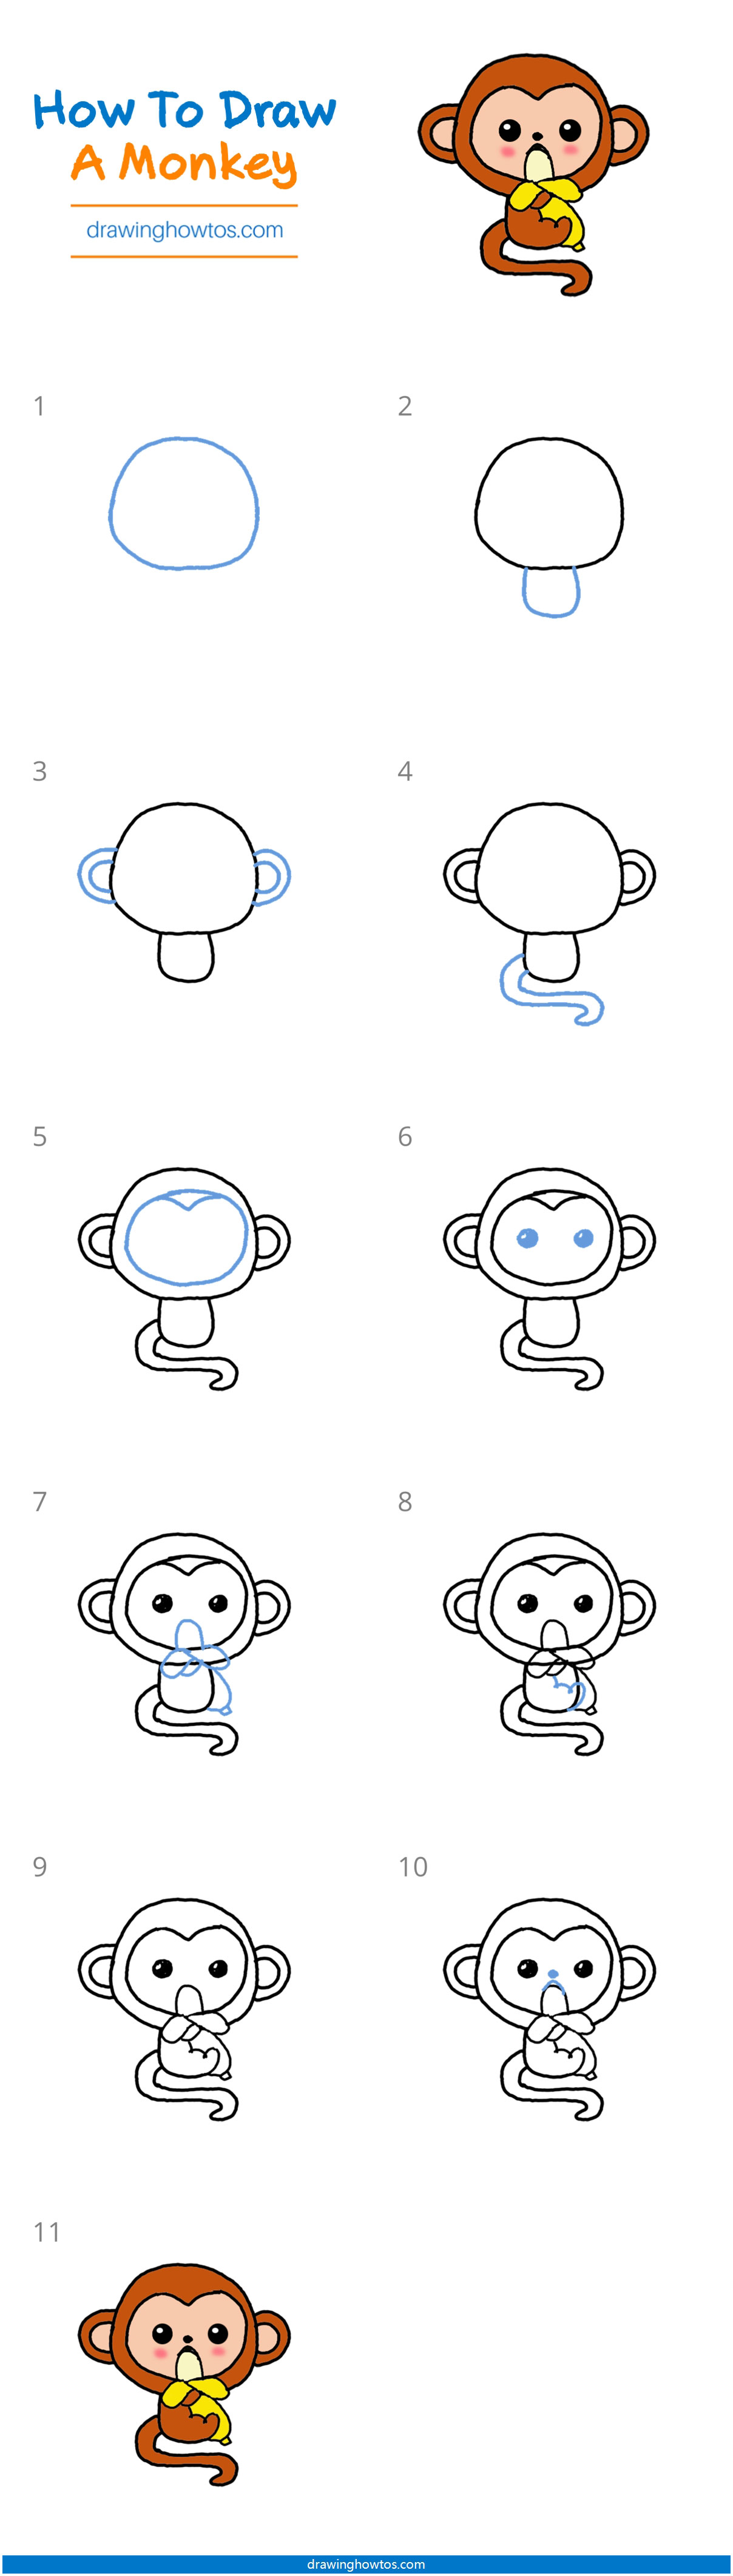 How to Draw a Cute Monkey Step by Step